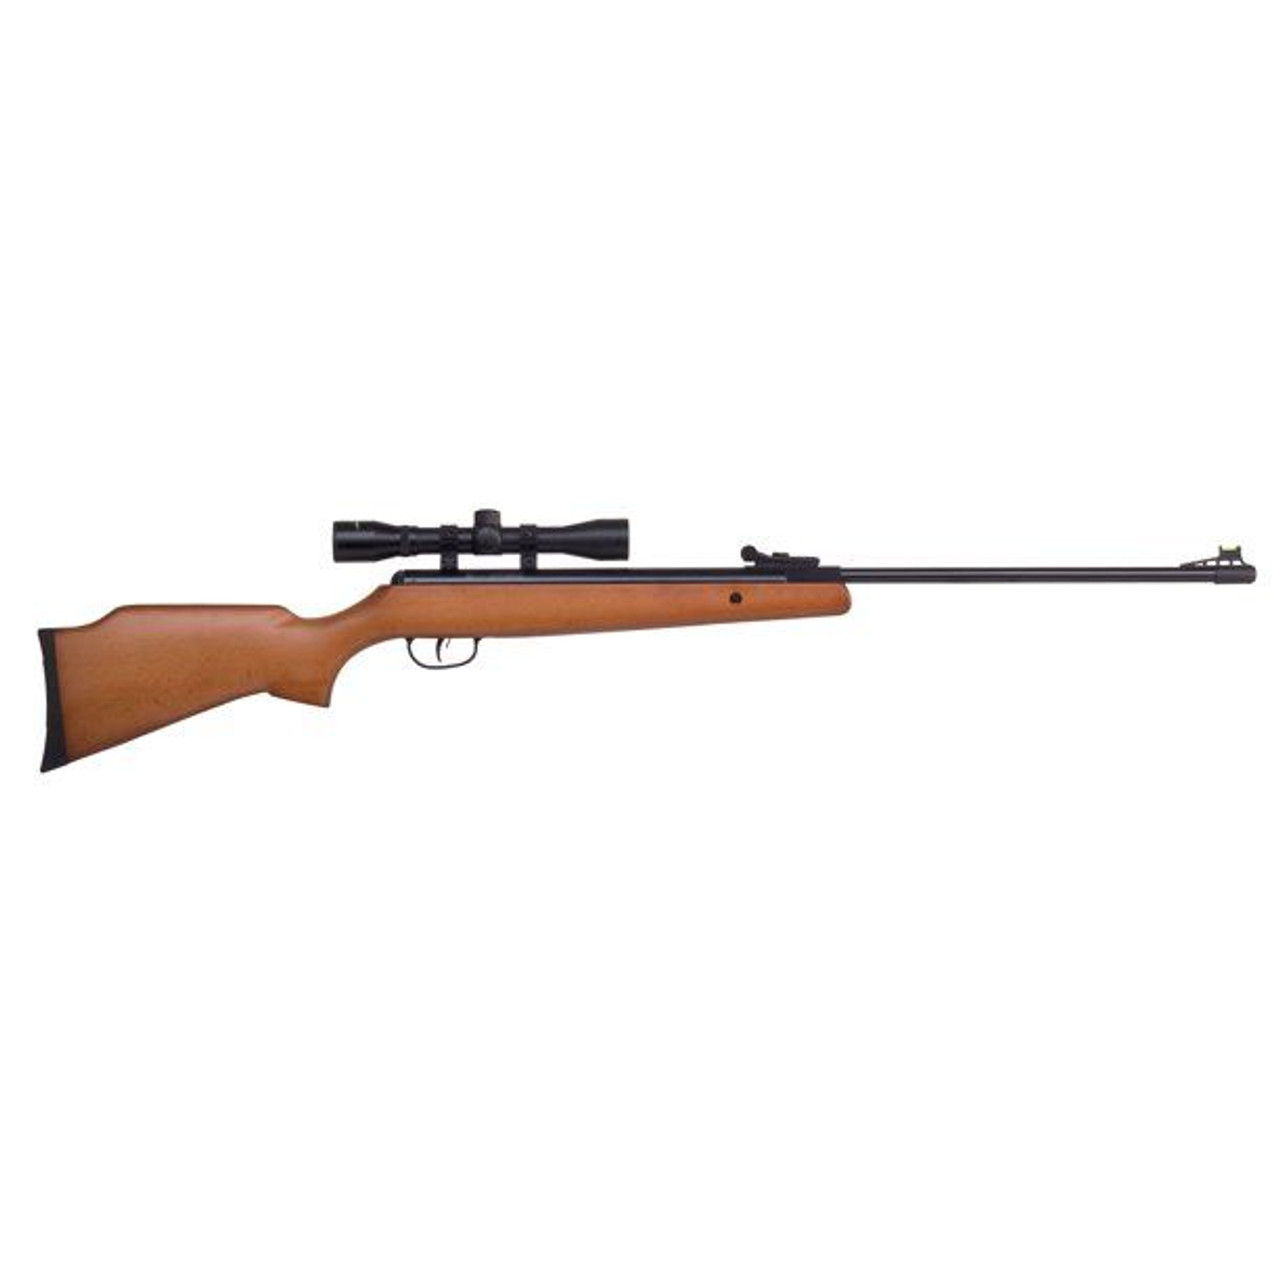 Features
Crosman Optimus Air Rifle features a .177 calibre spring piston break barrel

Shoots up to 495' per second

Fine quality hardwood, ambidextrous stock with raised cheek piece

Includes fully adjustable 4 x 32 scope

Safety and proper airgun handling are the responsibility of every shooter